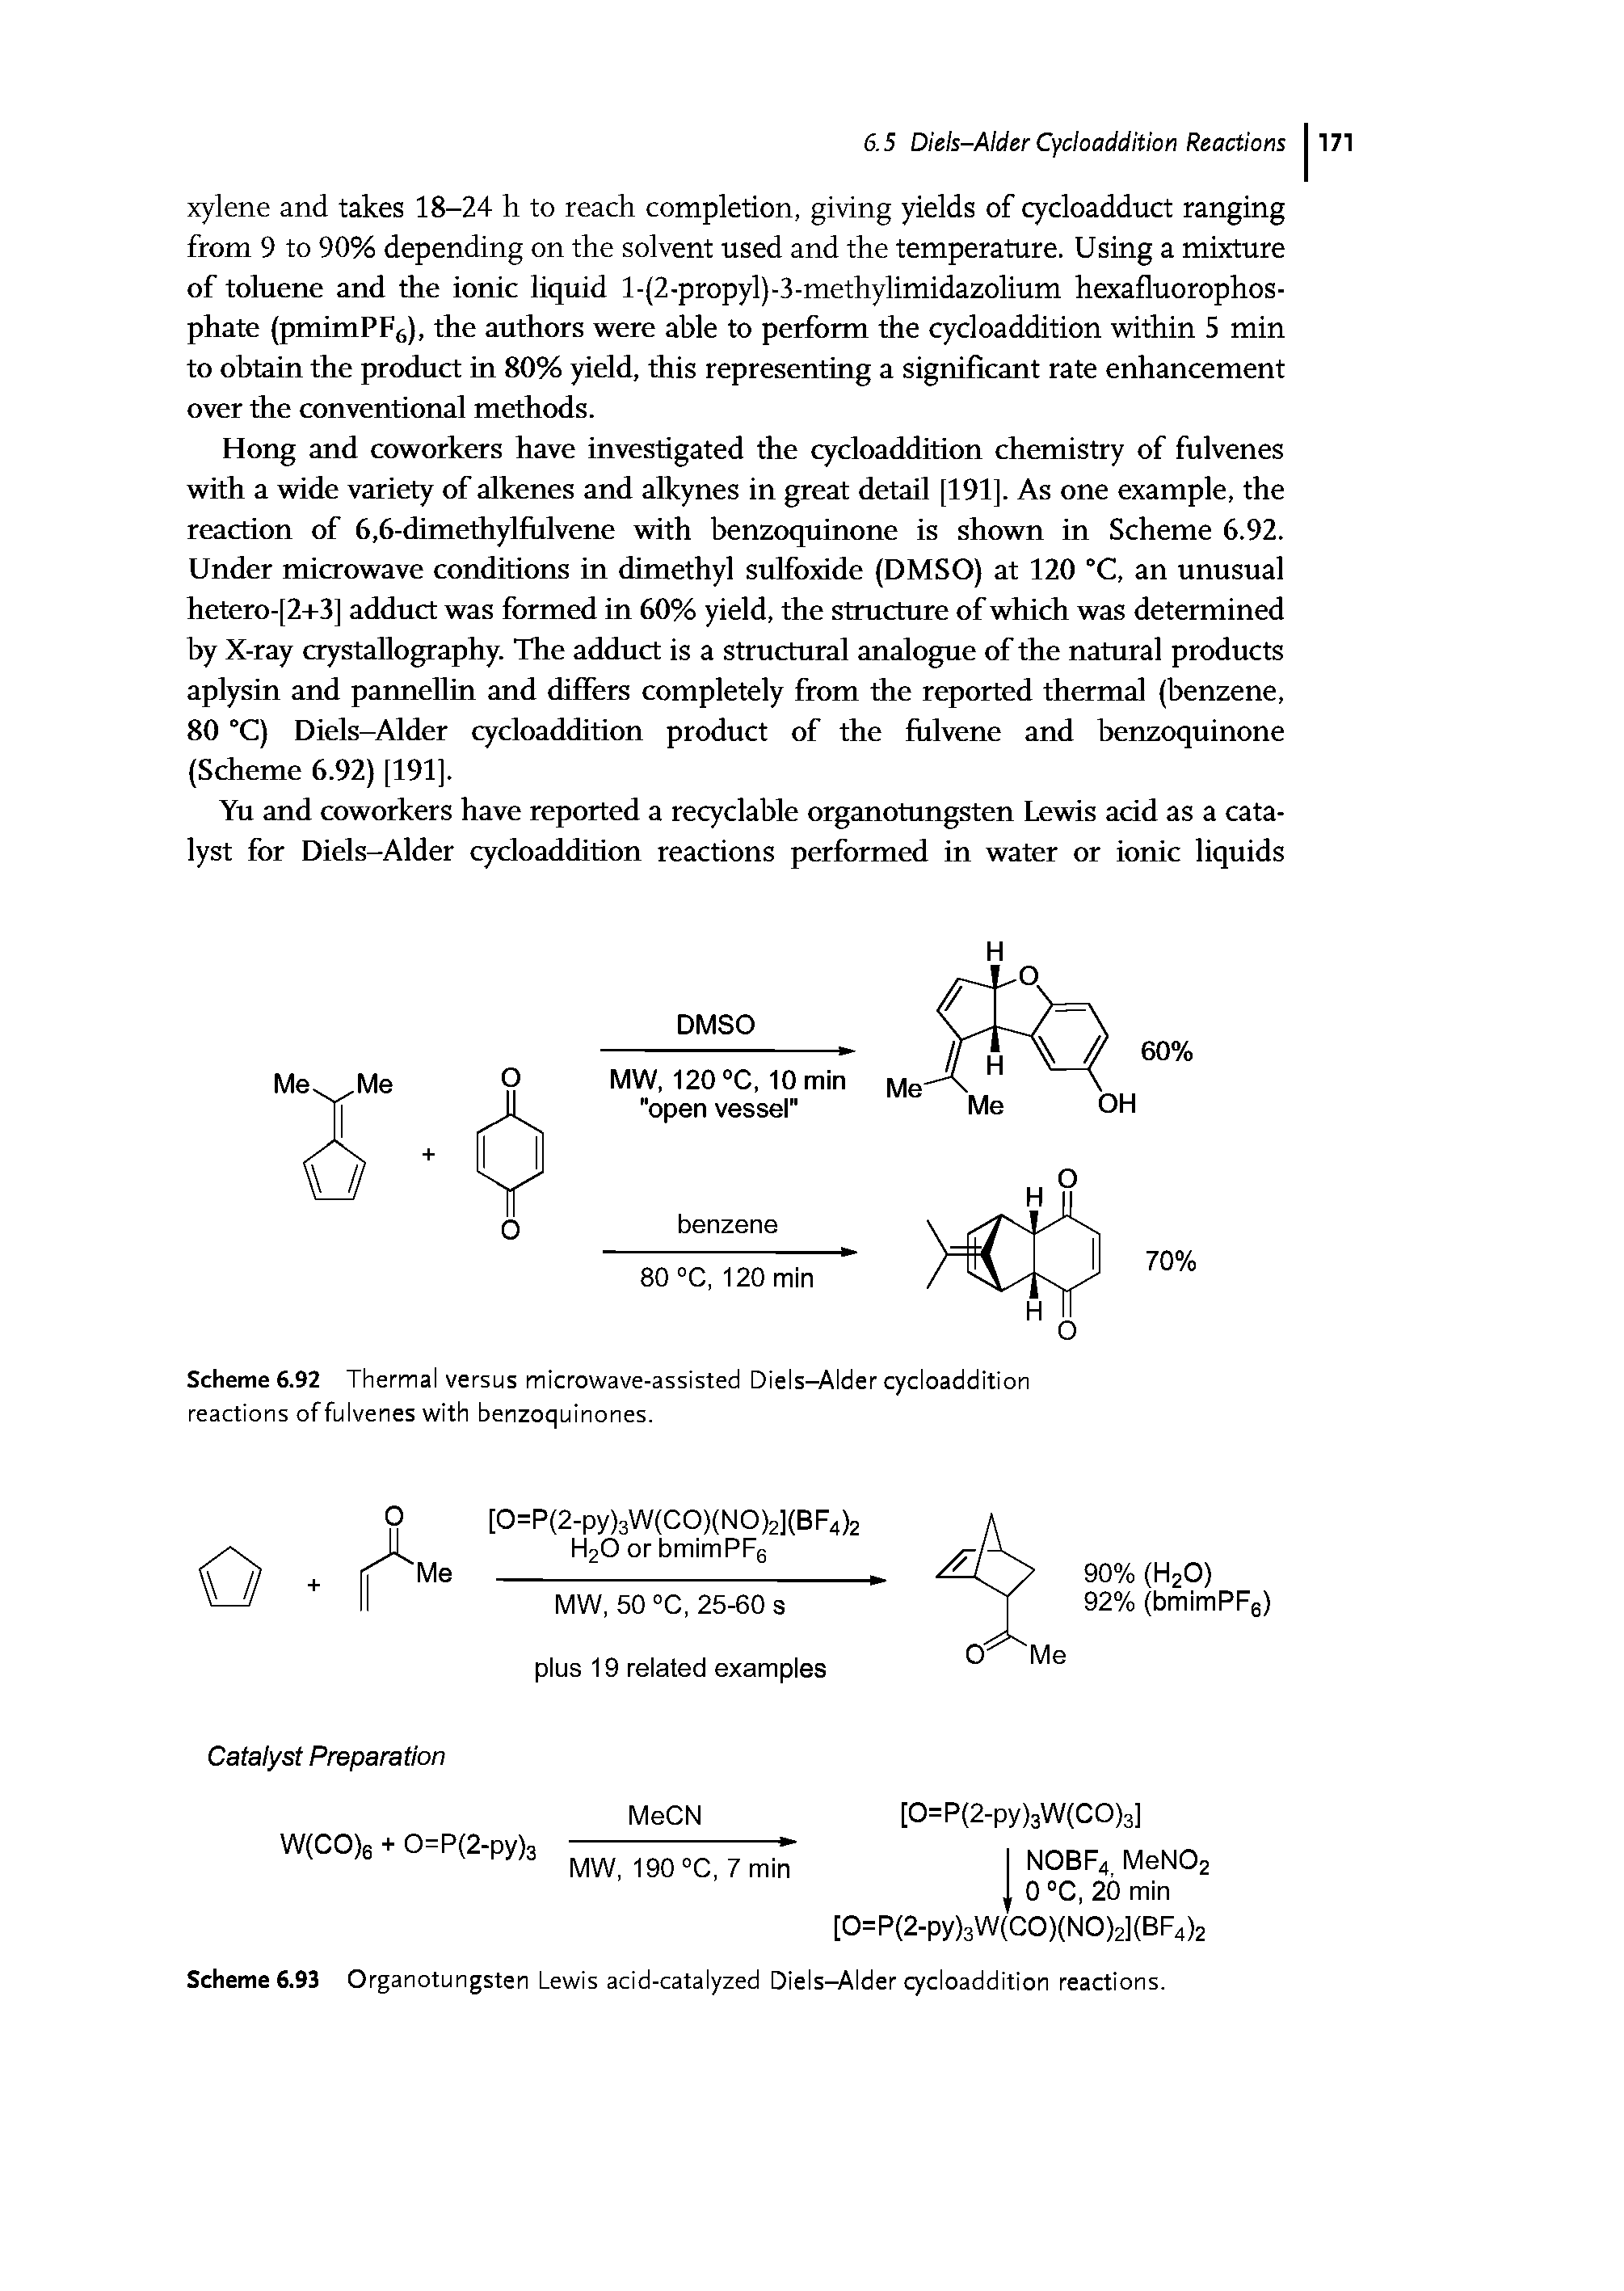 Scheme 6.92 Thermal versus microwave-assisted Diels-Alder cycloaddition reactions of fulvenes with benzoquinones.